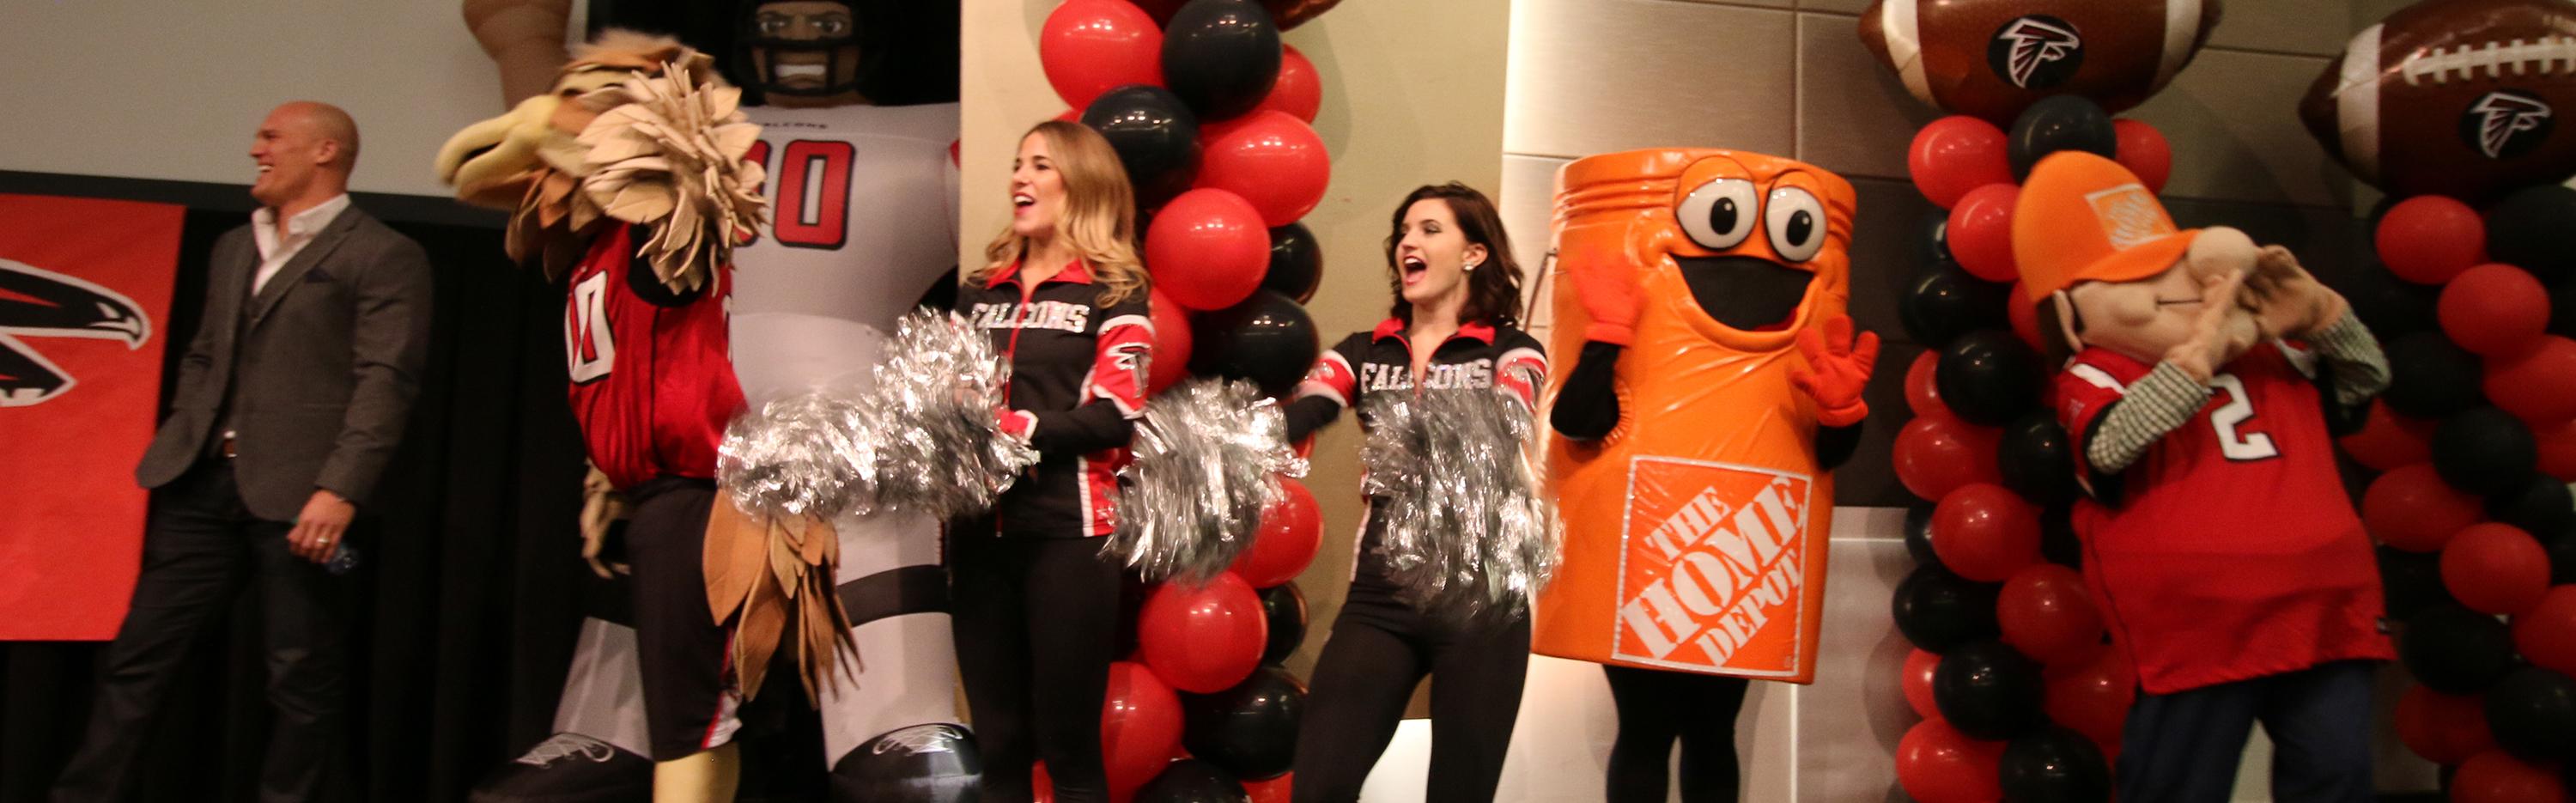 Falcons and Home Depot mascots